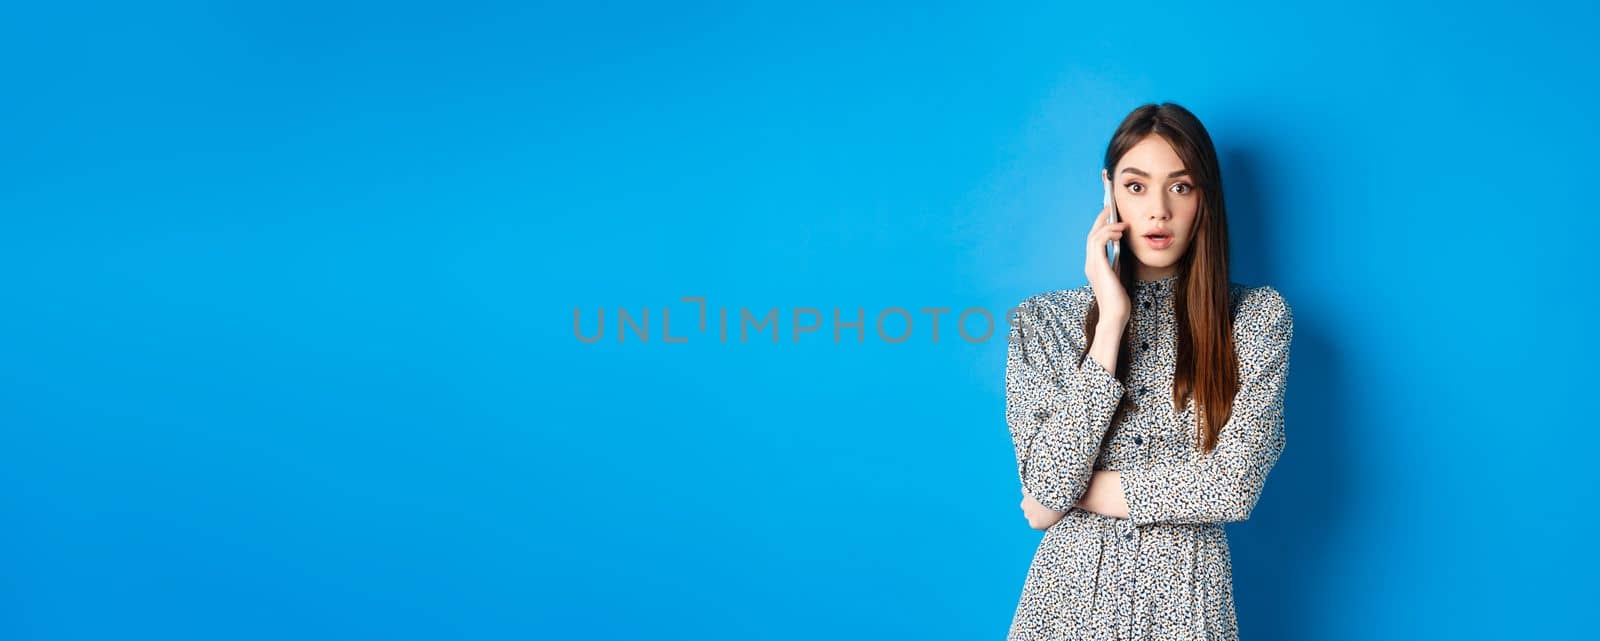 Shocked girl talking on mobile phone, gasping amazed at camera, speaking with someone and hear shocking news, standing in dress on blue background.